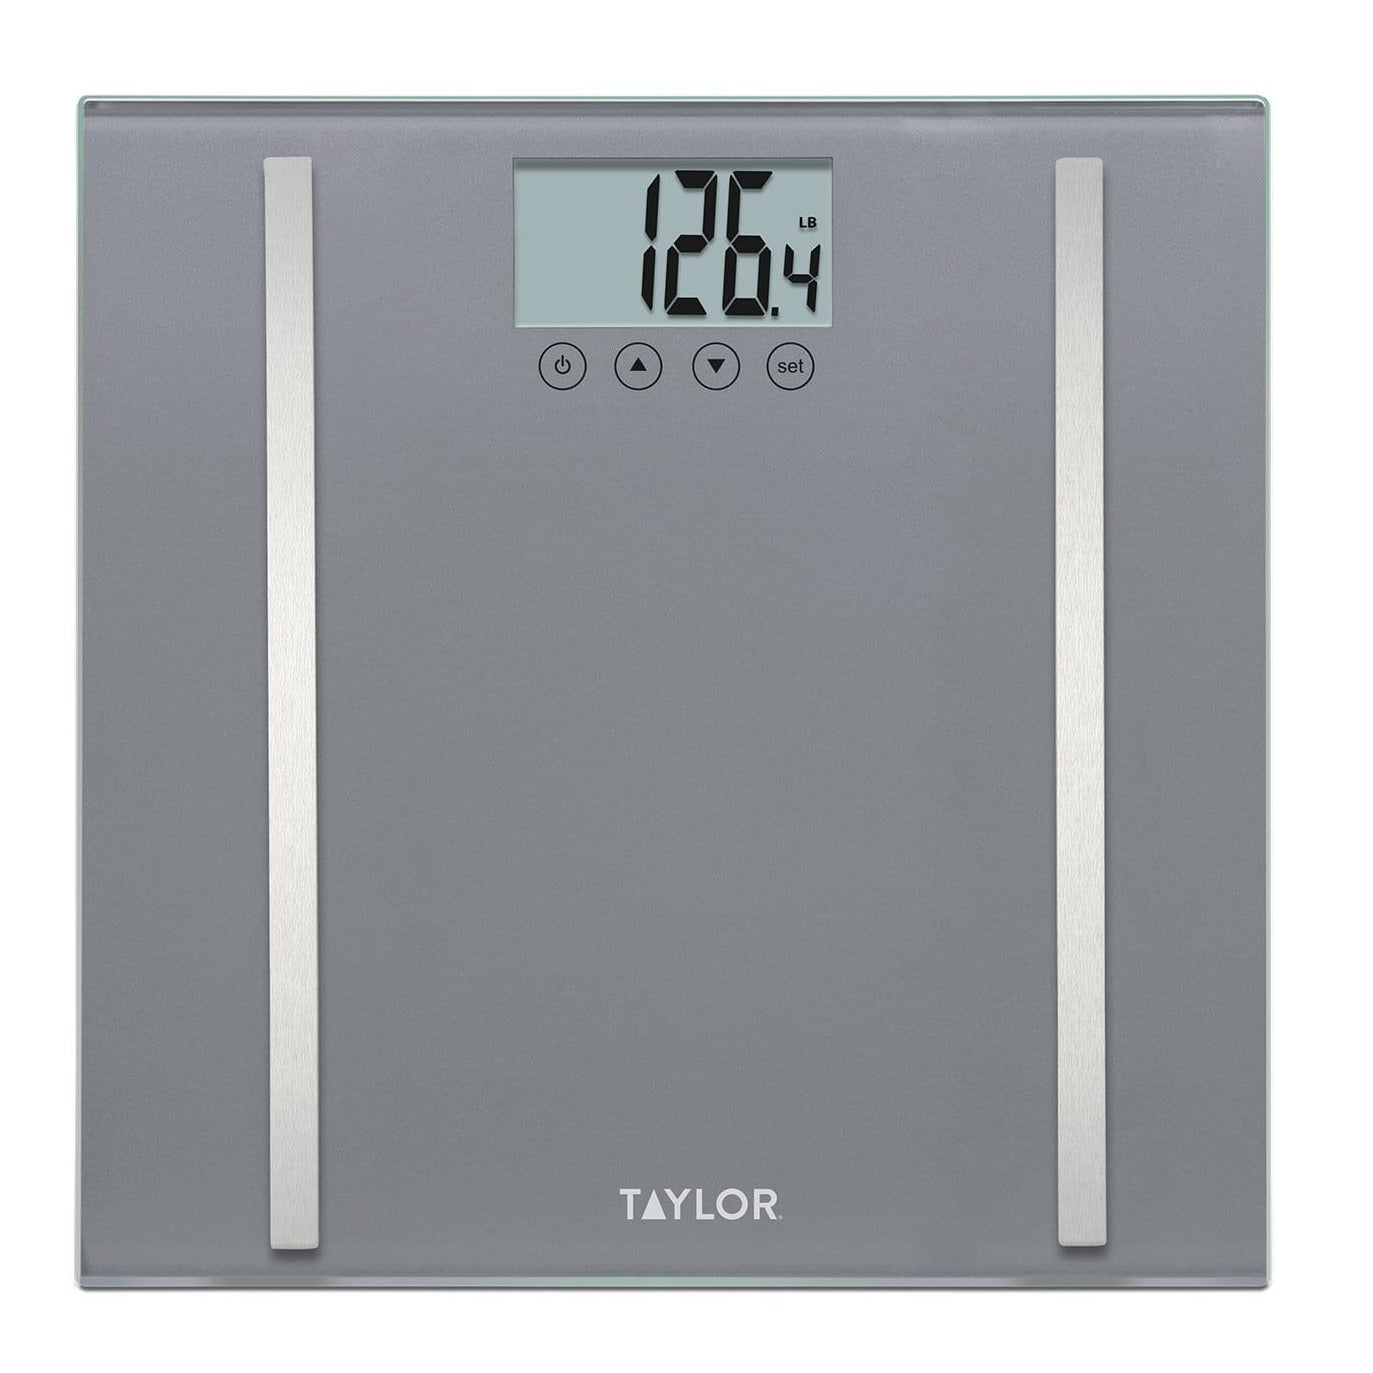 Taylor Glass Body Fat Scale 400lb Capacity